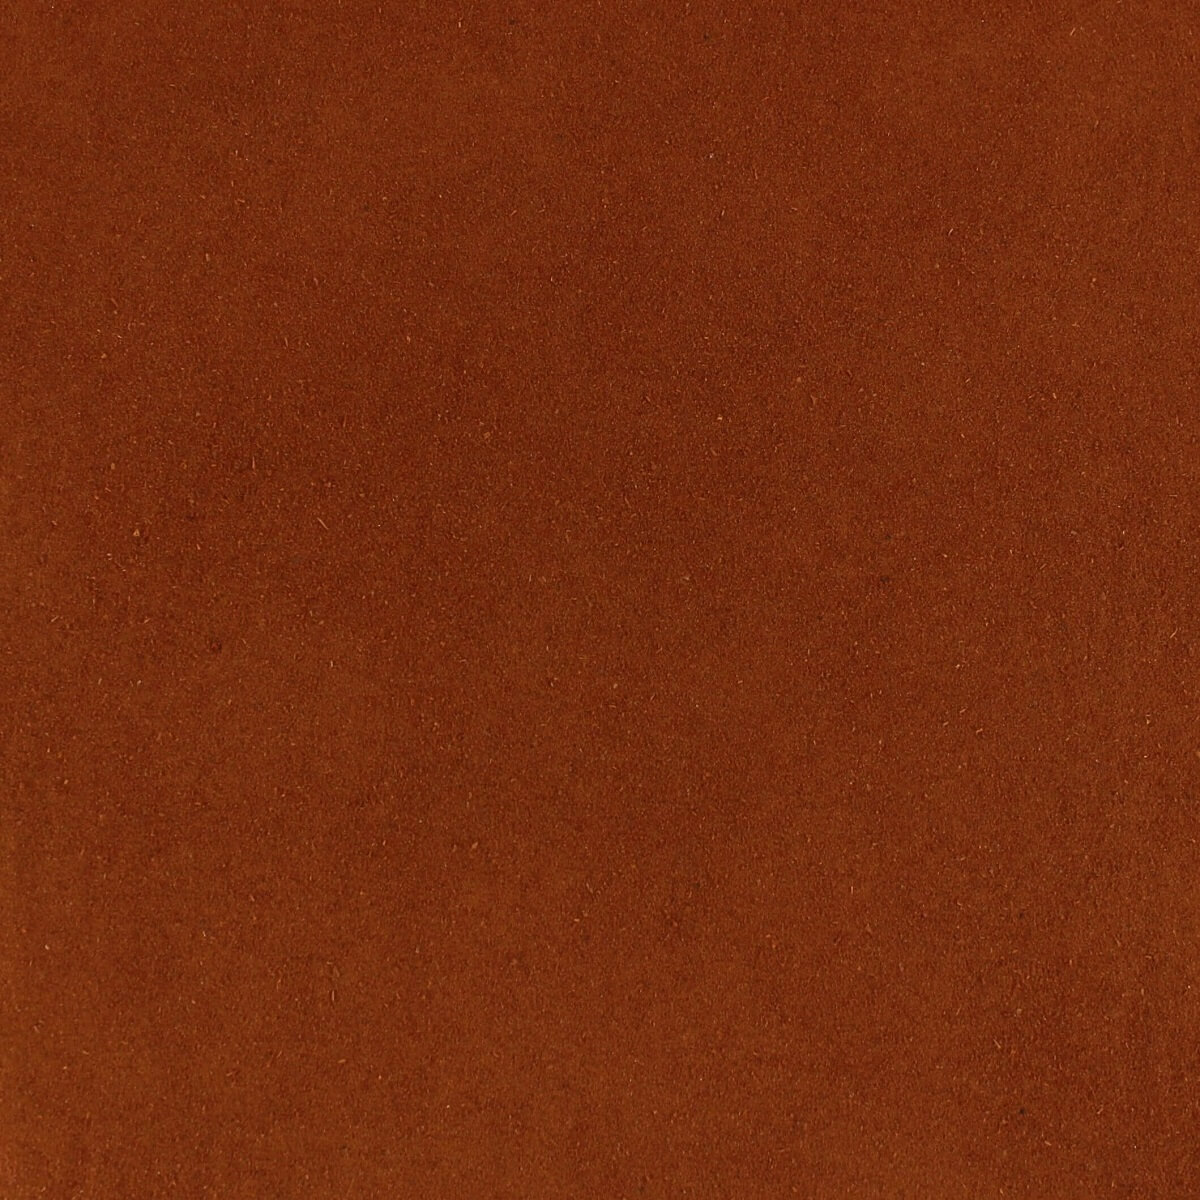 A close up image of a brown background featuring Harmony House Tomato Powder (30 lbs).